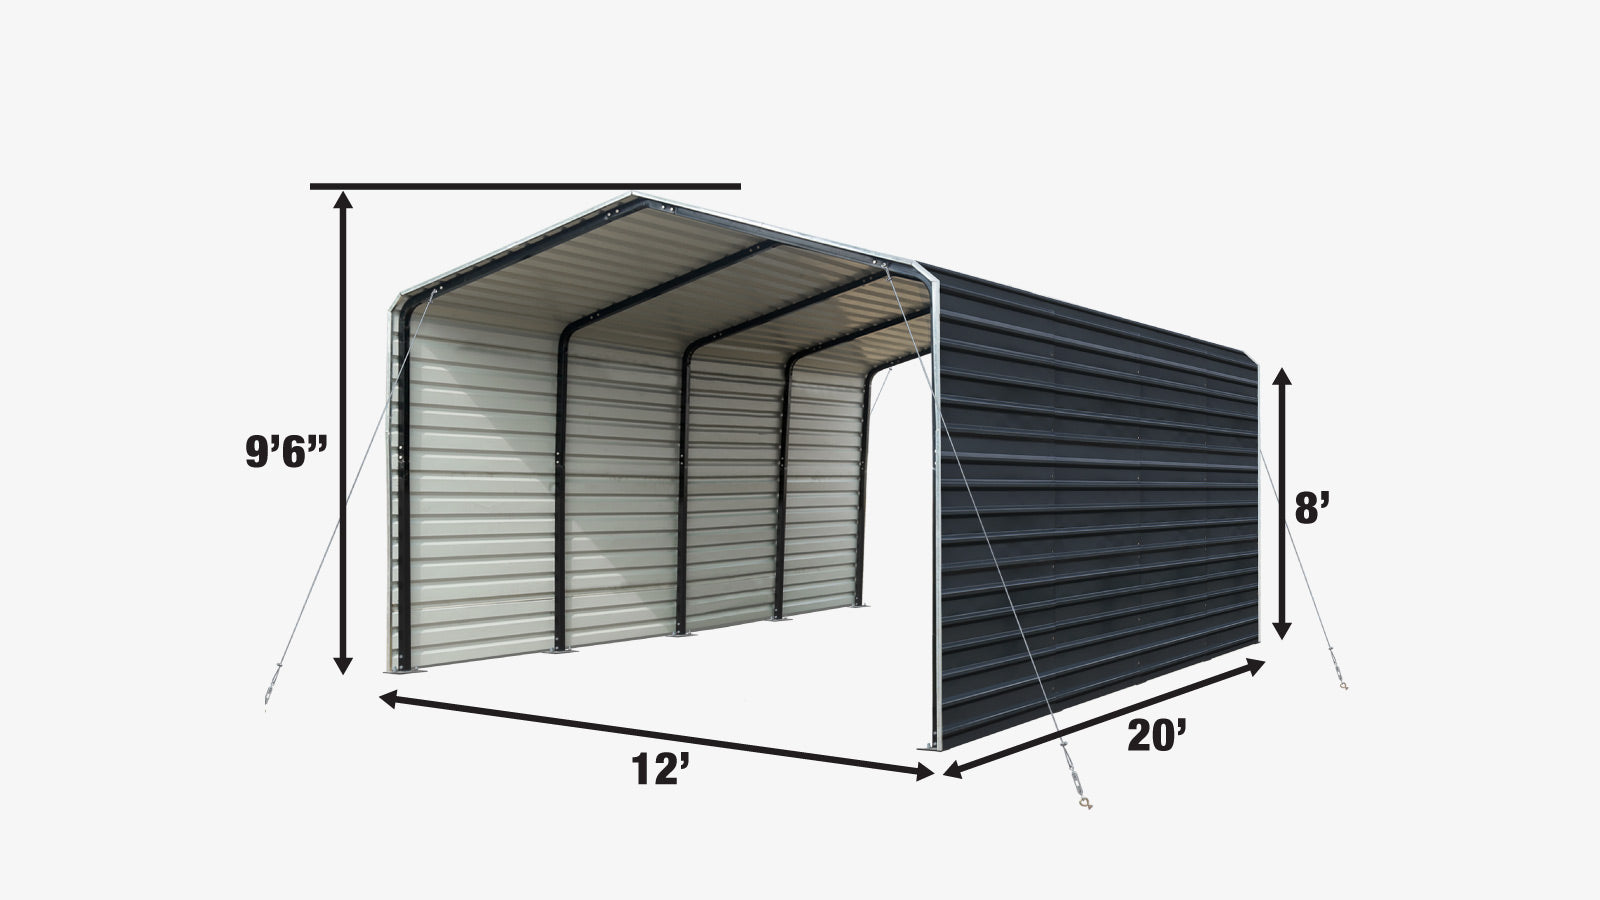 TMG Industrial 12’ x 20’ Metal Shed Carport with 8’ Enclosed Sidewalls, TMG-MSC1220F-specifications-image